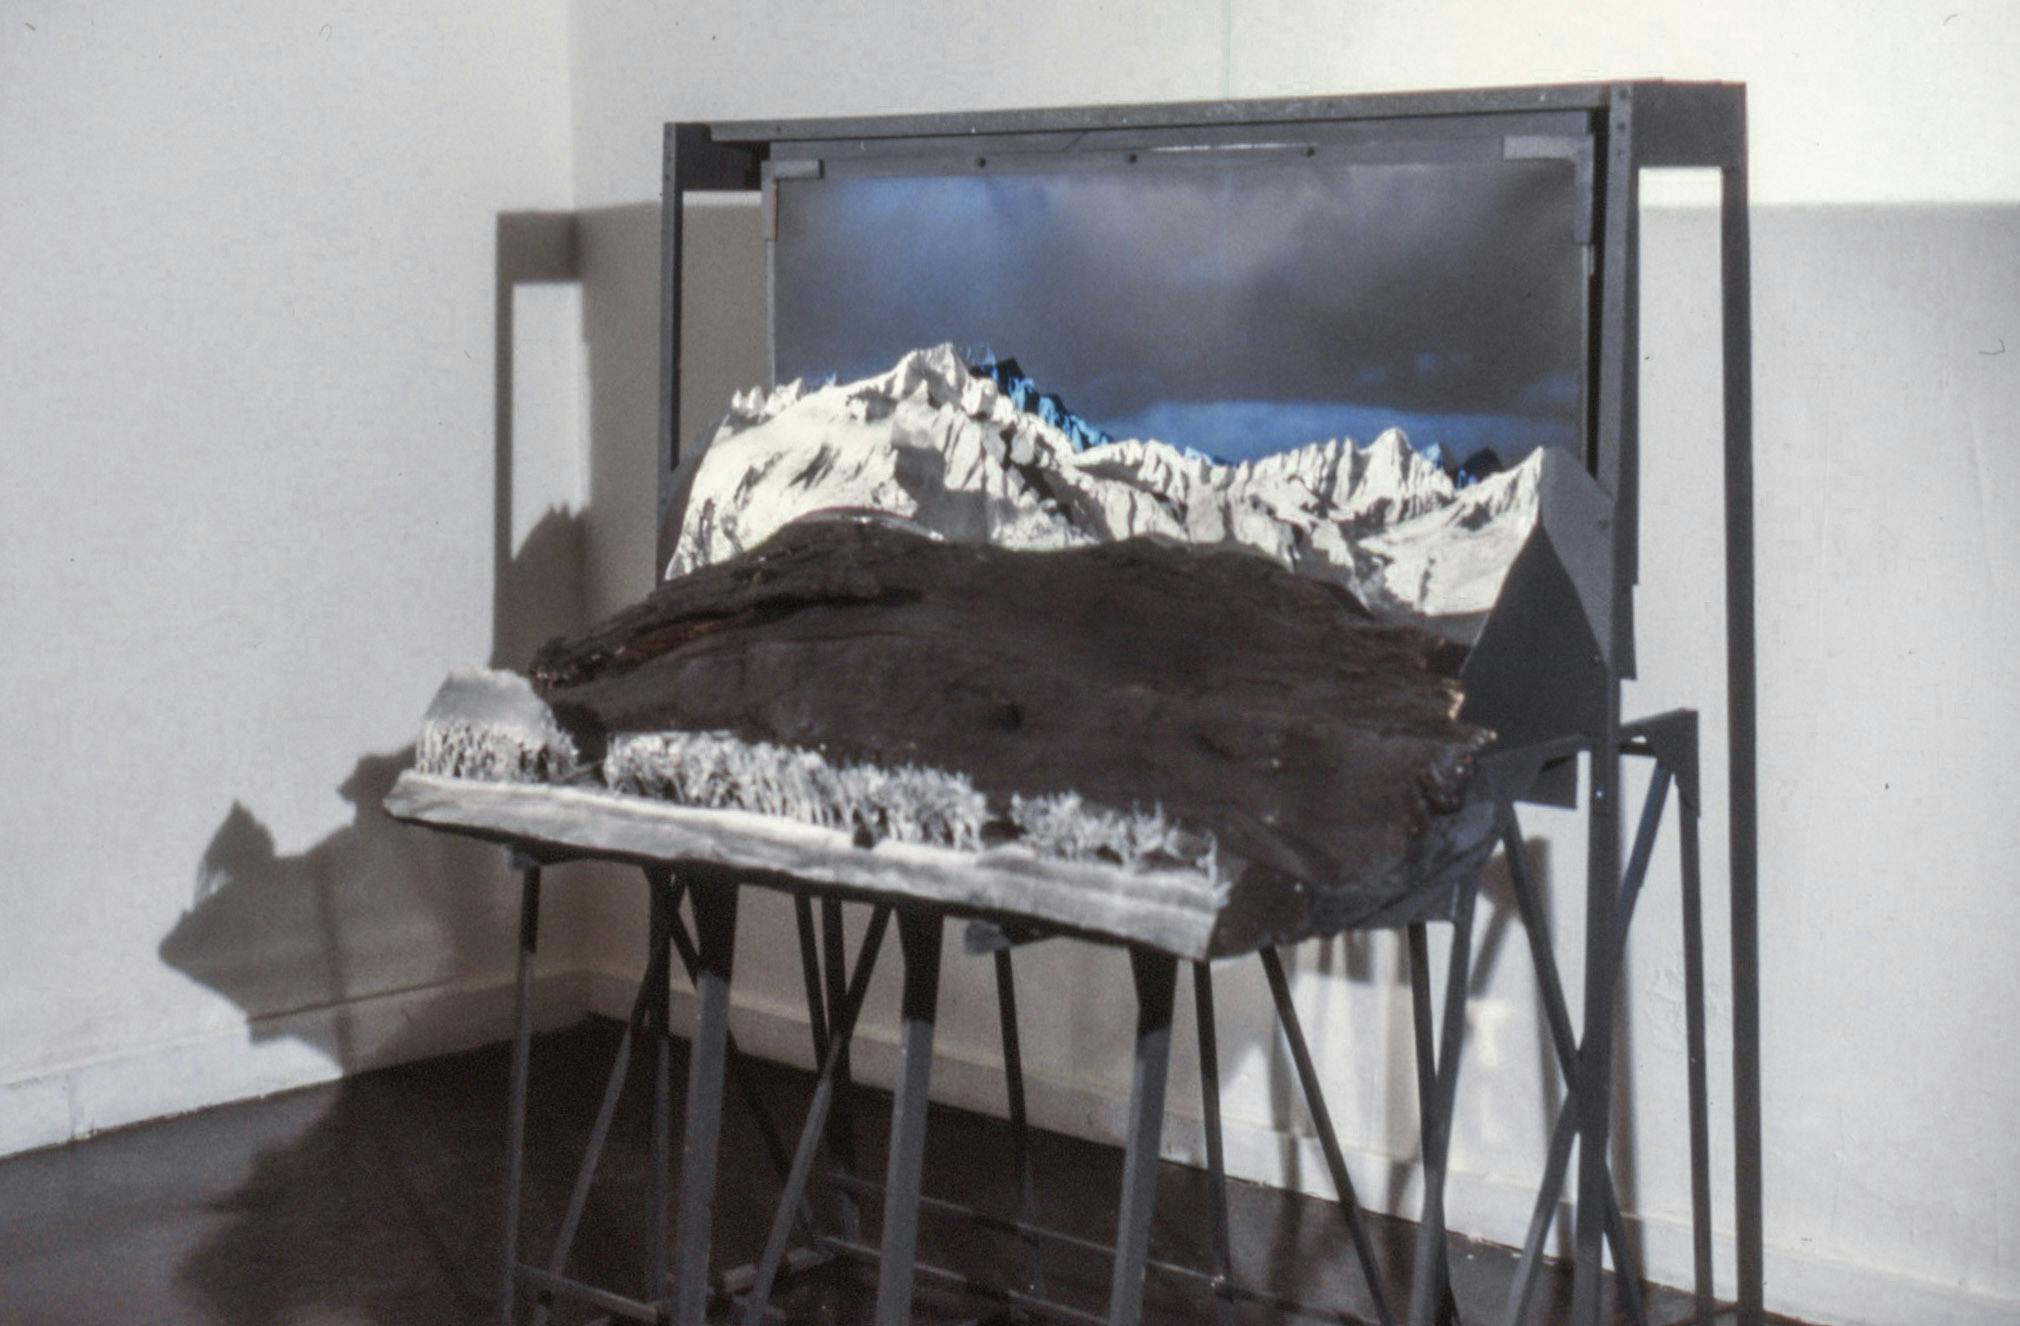 In the corner of a gallery, a large photo set rests on a black wooden stand. The set has a dark blue sky background, layered mountain forms, a black textured surface, and white trees.